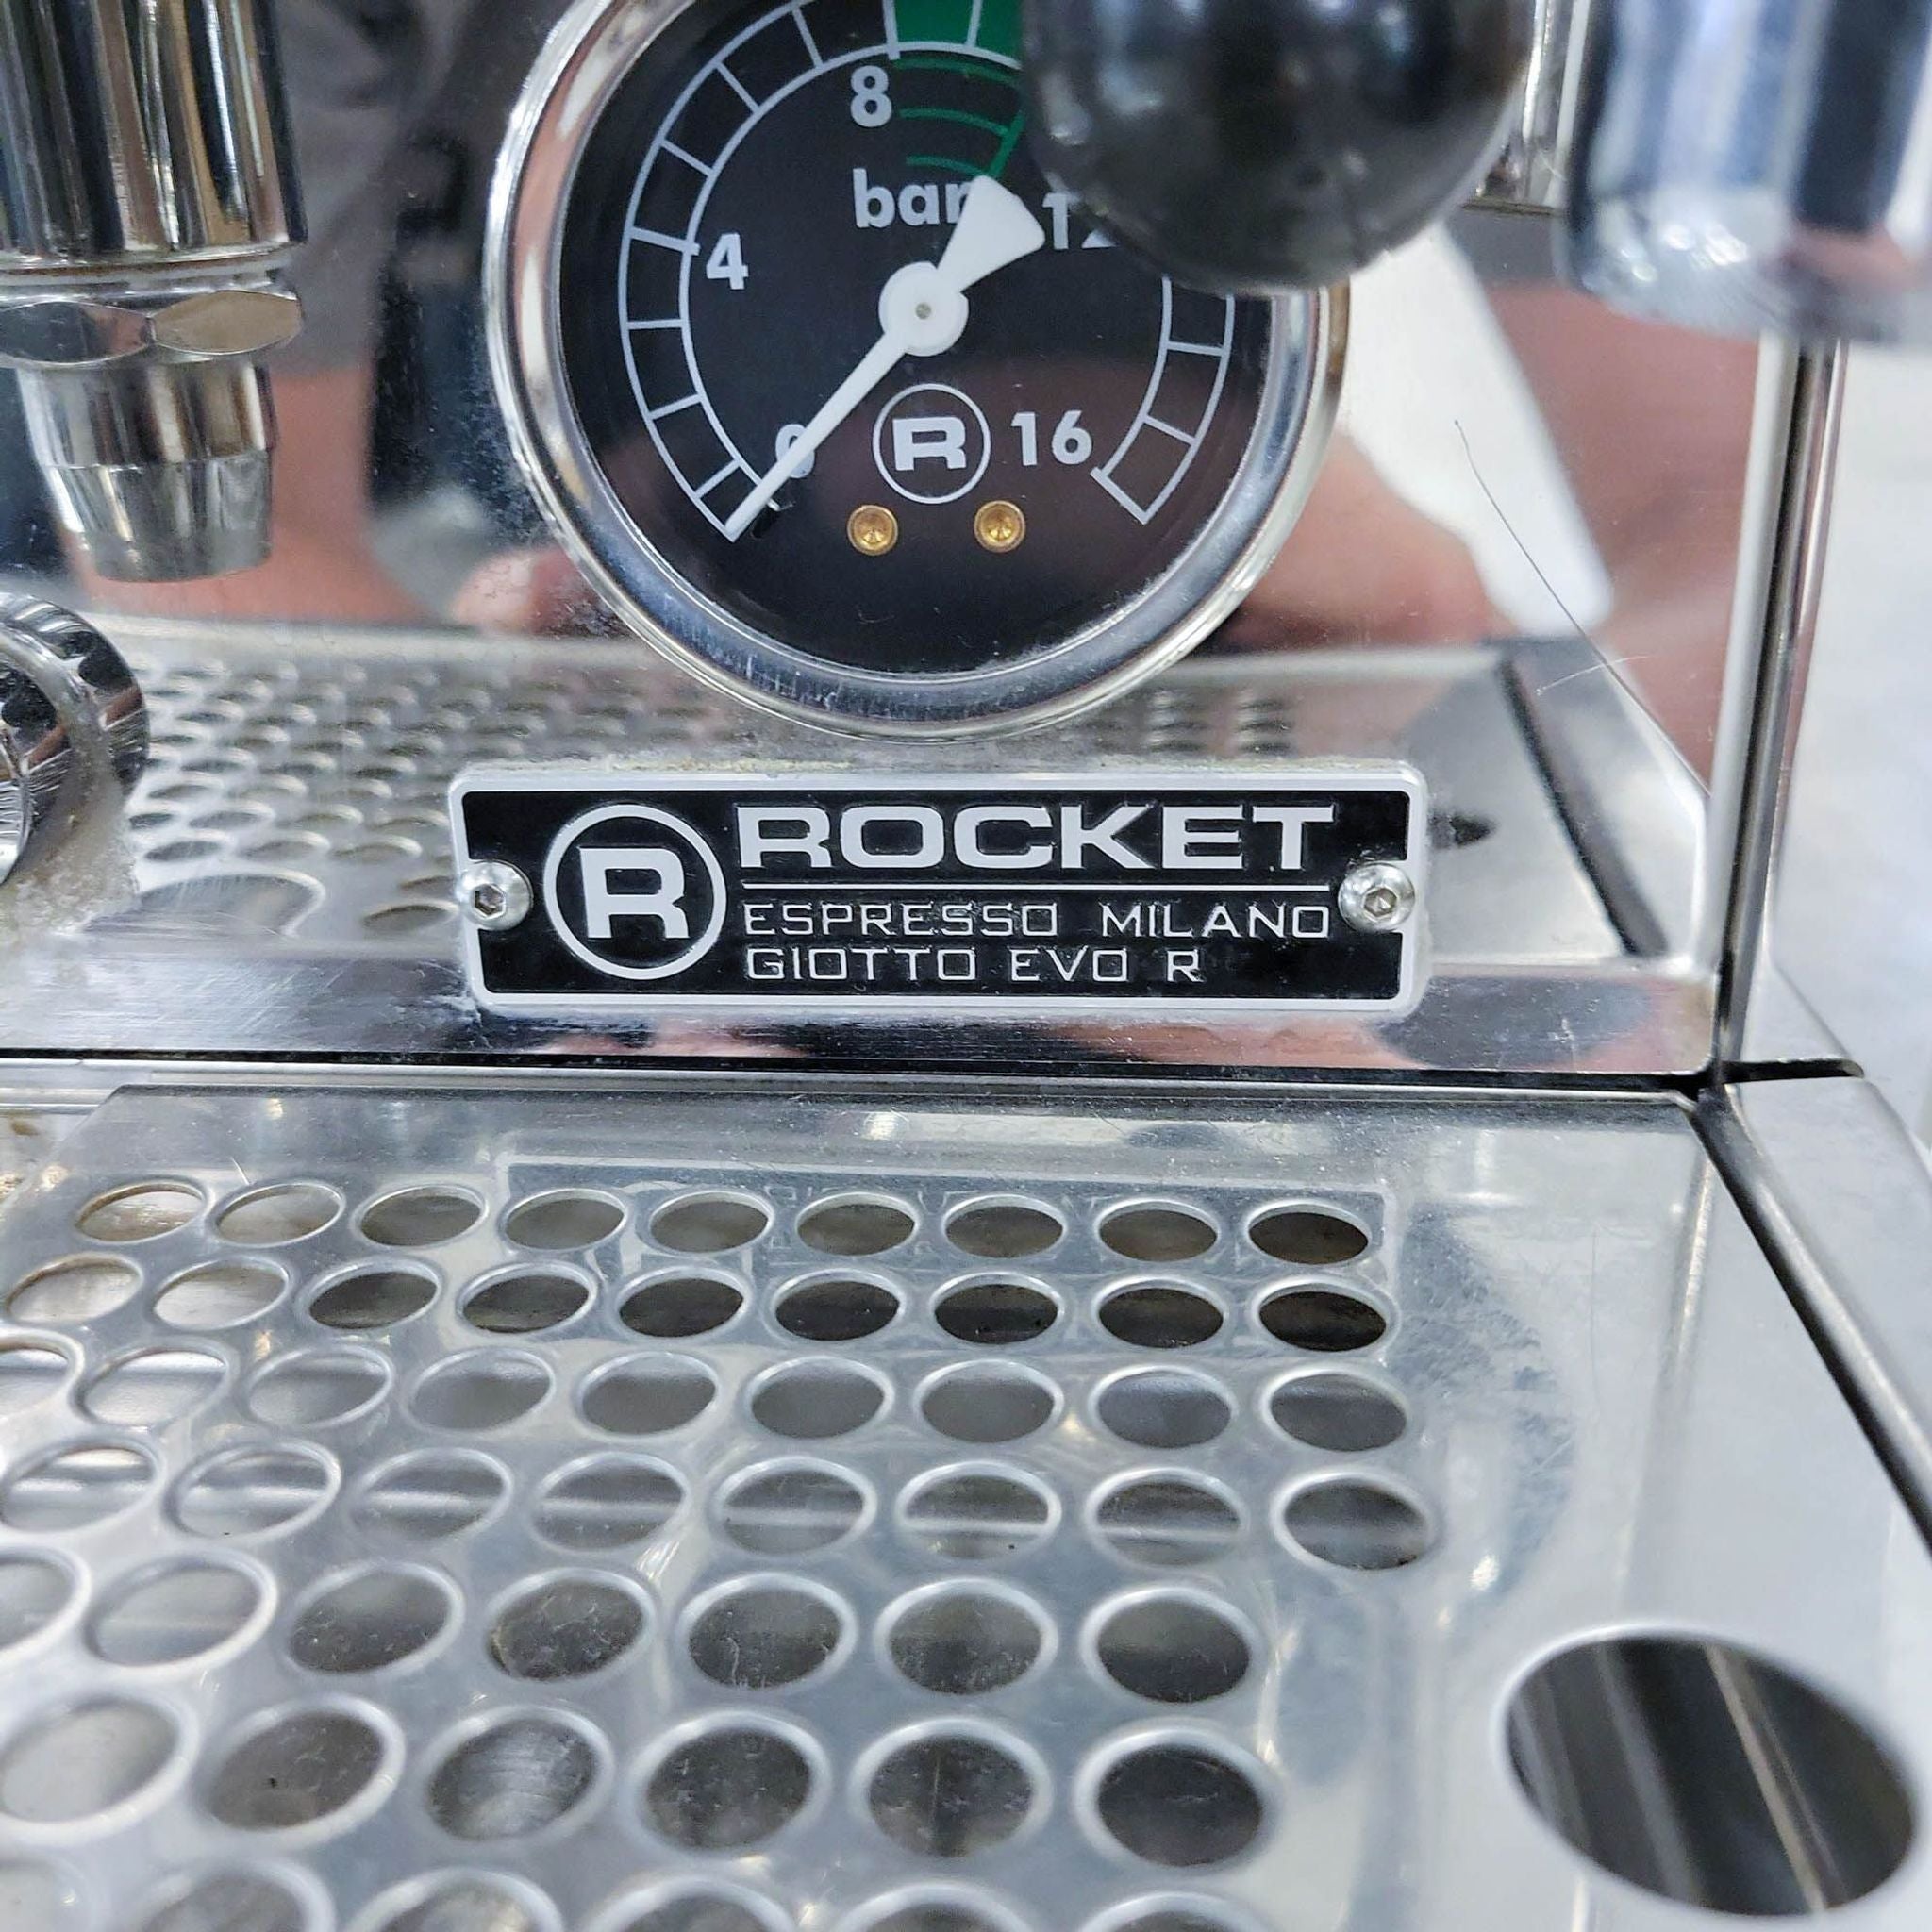 Close-up of a Rocket Espresso Milano Giotto Evo R machine with pressure gauge and shiny metal finish.